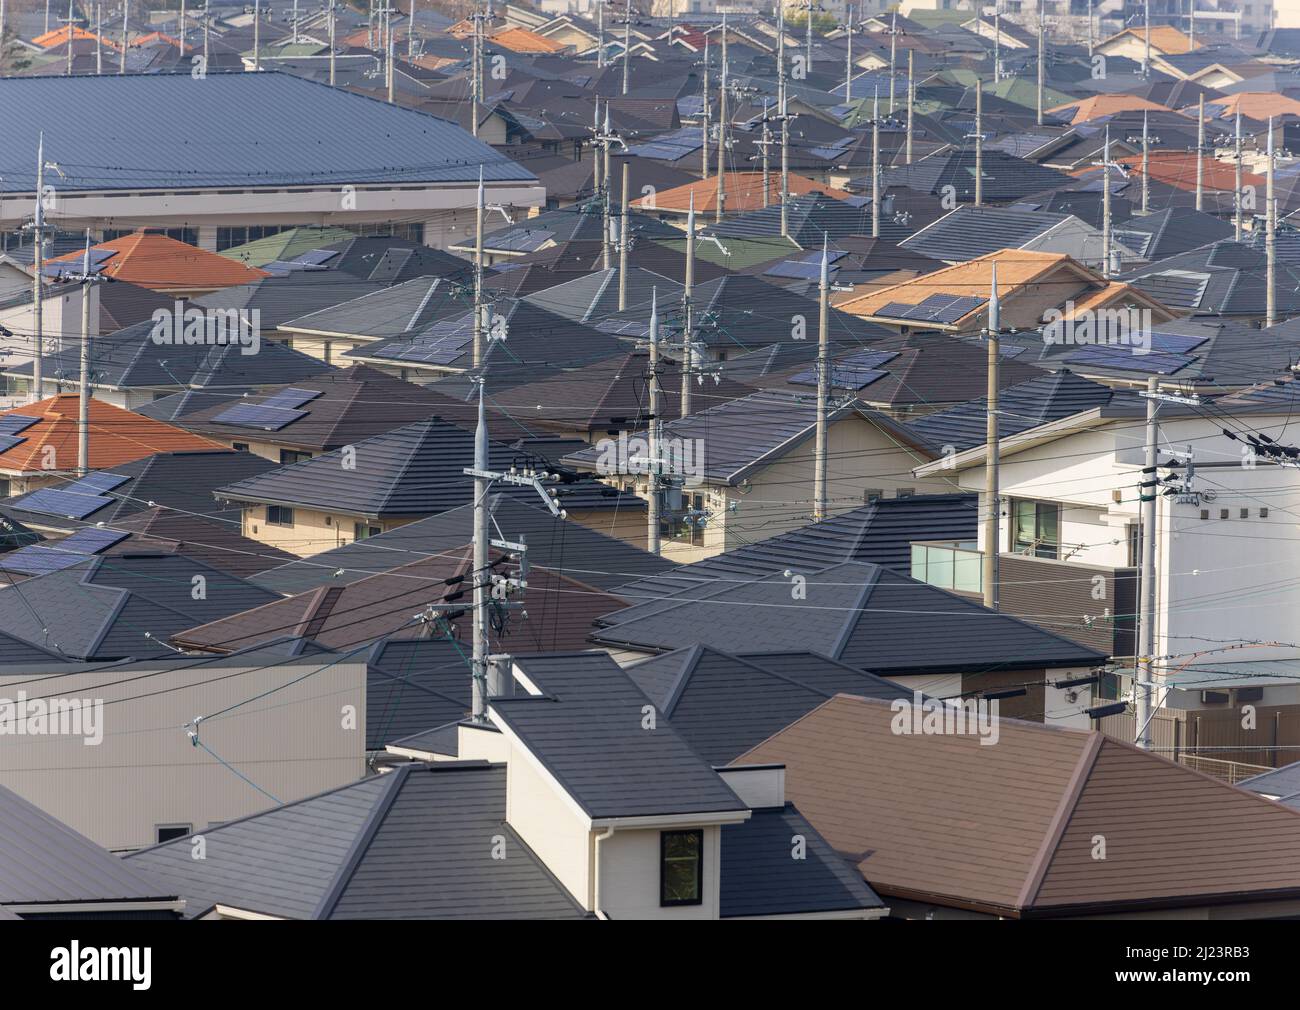 Overhead view of house roofs and electrical poles in suburban landscape Stock Photo